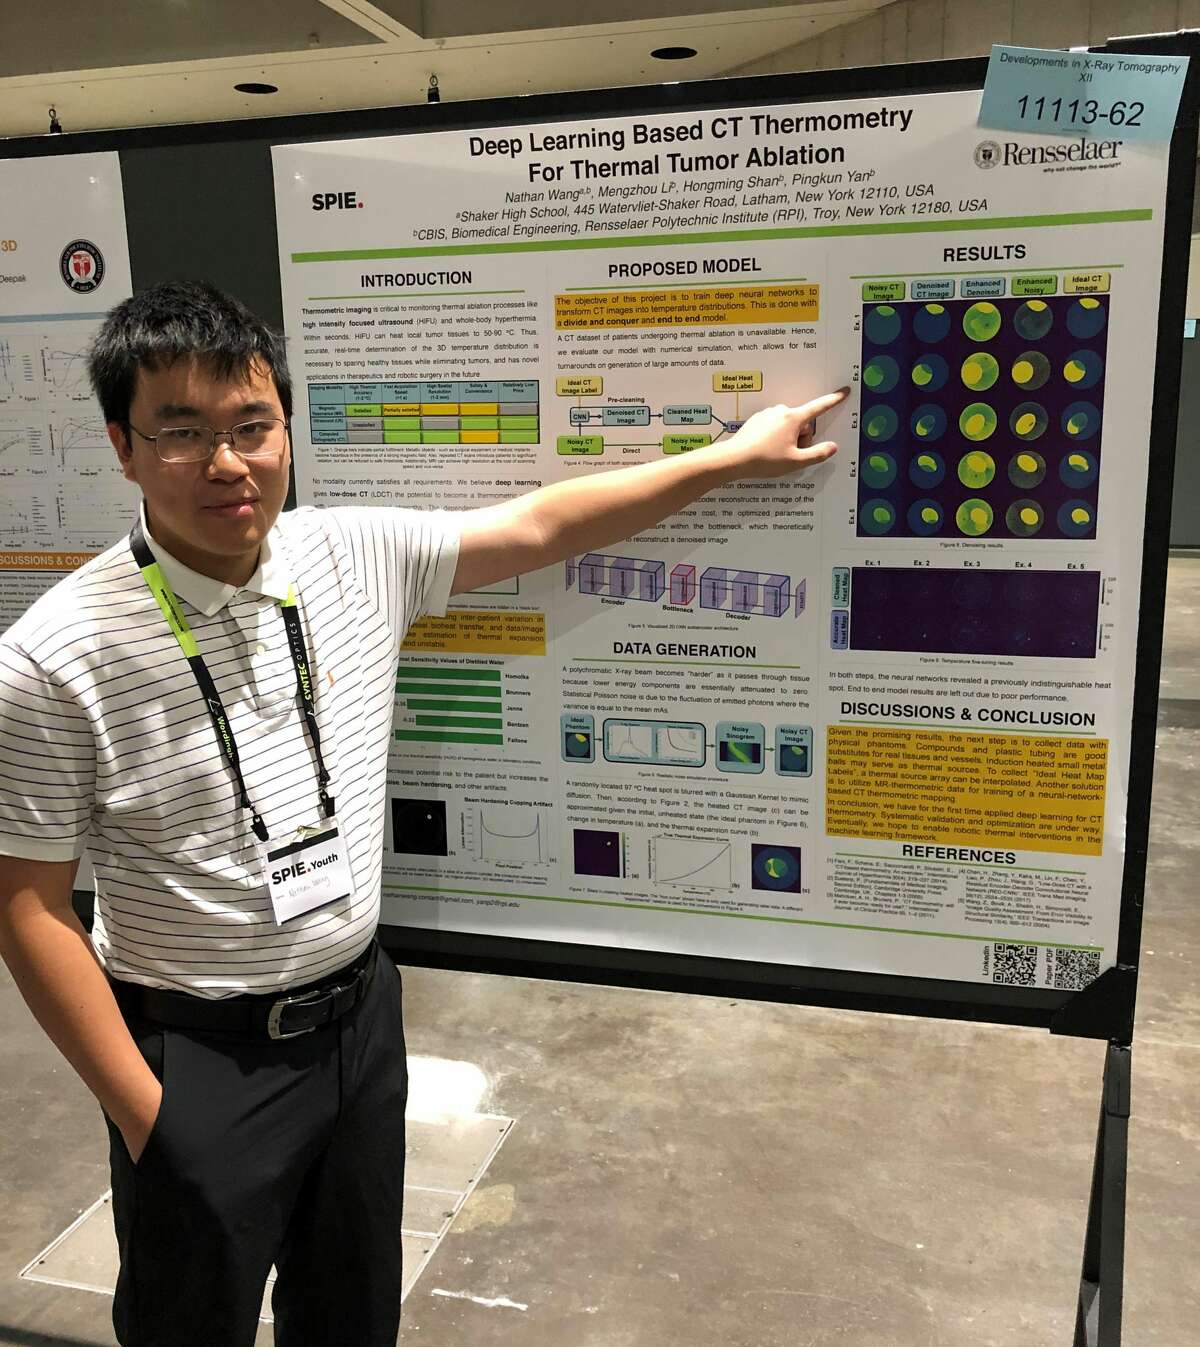 As a Shaker High School student, Nathan Wang of Latham, N.Y. was a contestant at the SPIE convention and is pictured here at the convention in San Diego in August 2019. Wang proposed legislation on artificial intelligence education which Congress included in the Fiscal Year 2021 National Defense Authorization Act.